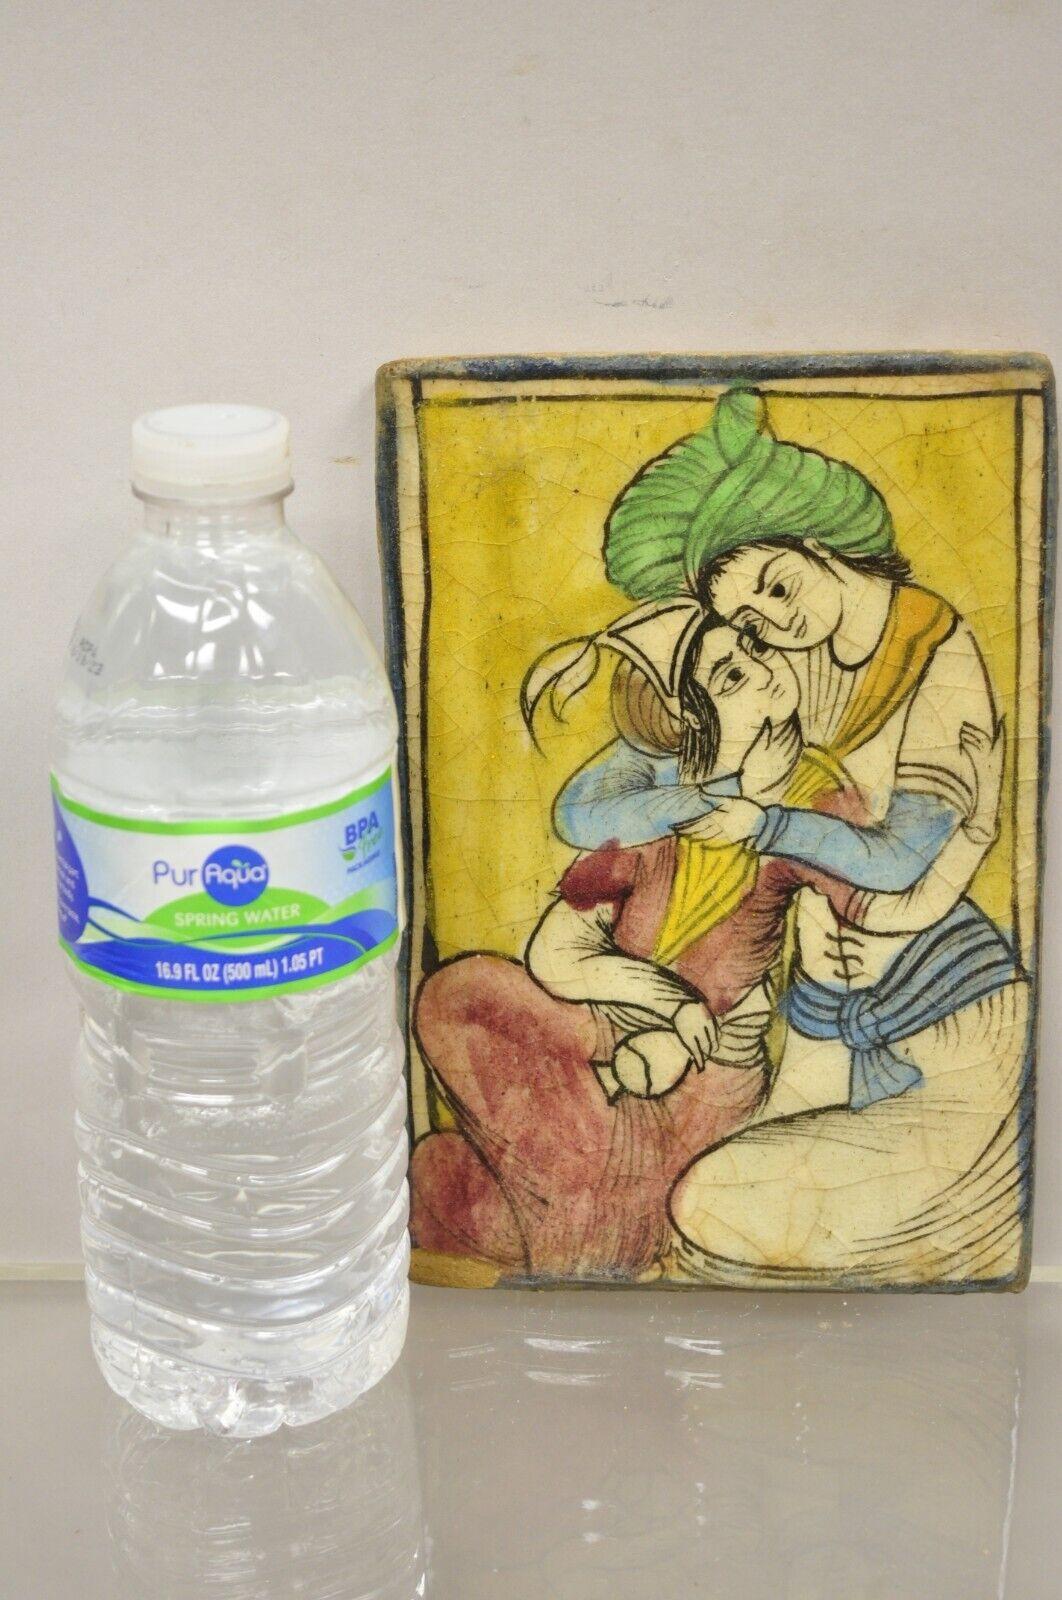 Antique Persian Iznik Qajar Style ceramic yellow pottery tile Loving Couple B C5. Item features original crackle glazed finish, heavy ceramic pottery construction, very impressive detail, wonderful style and form. Great to mount as wall art or